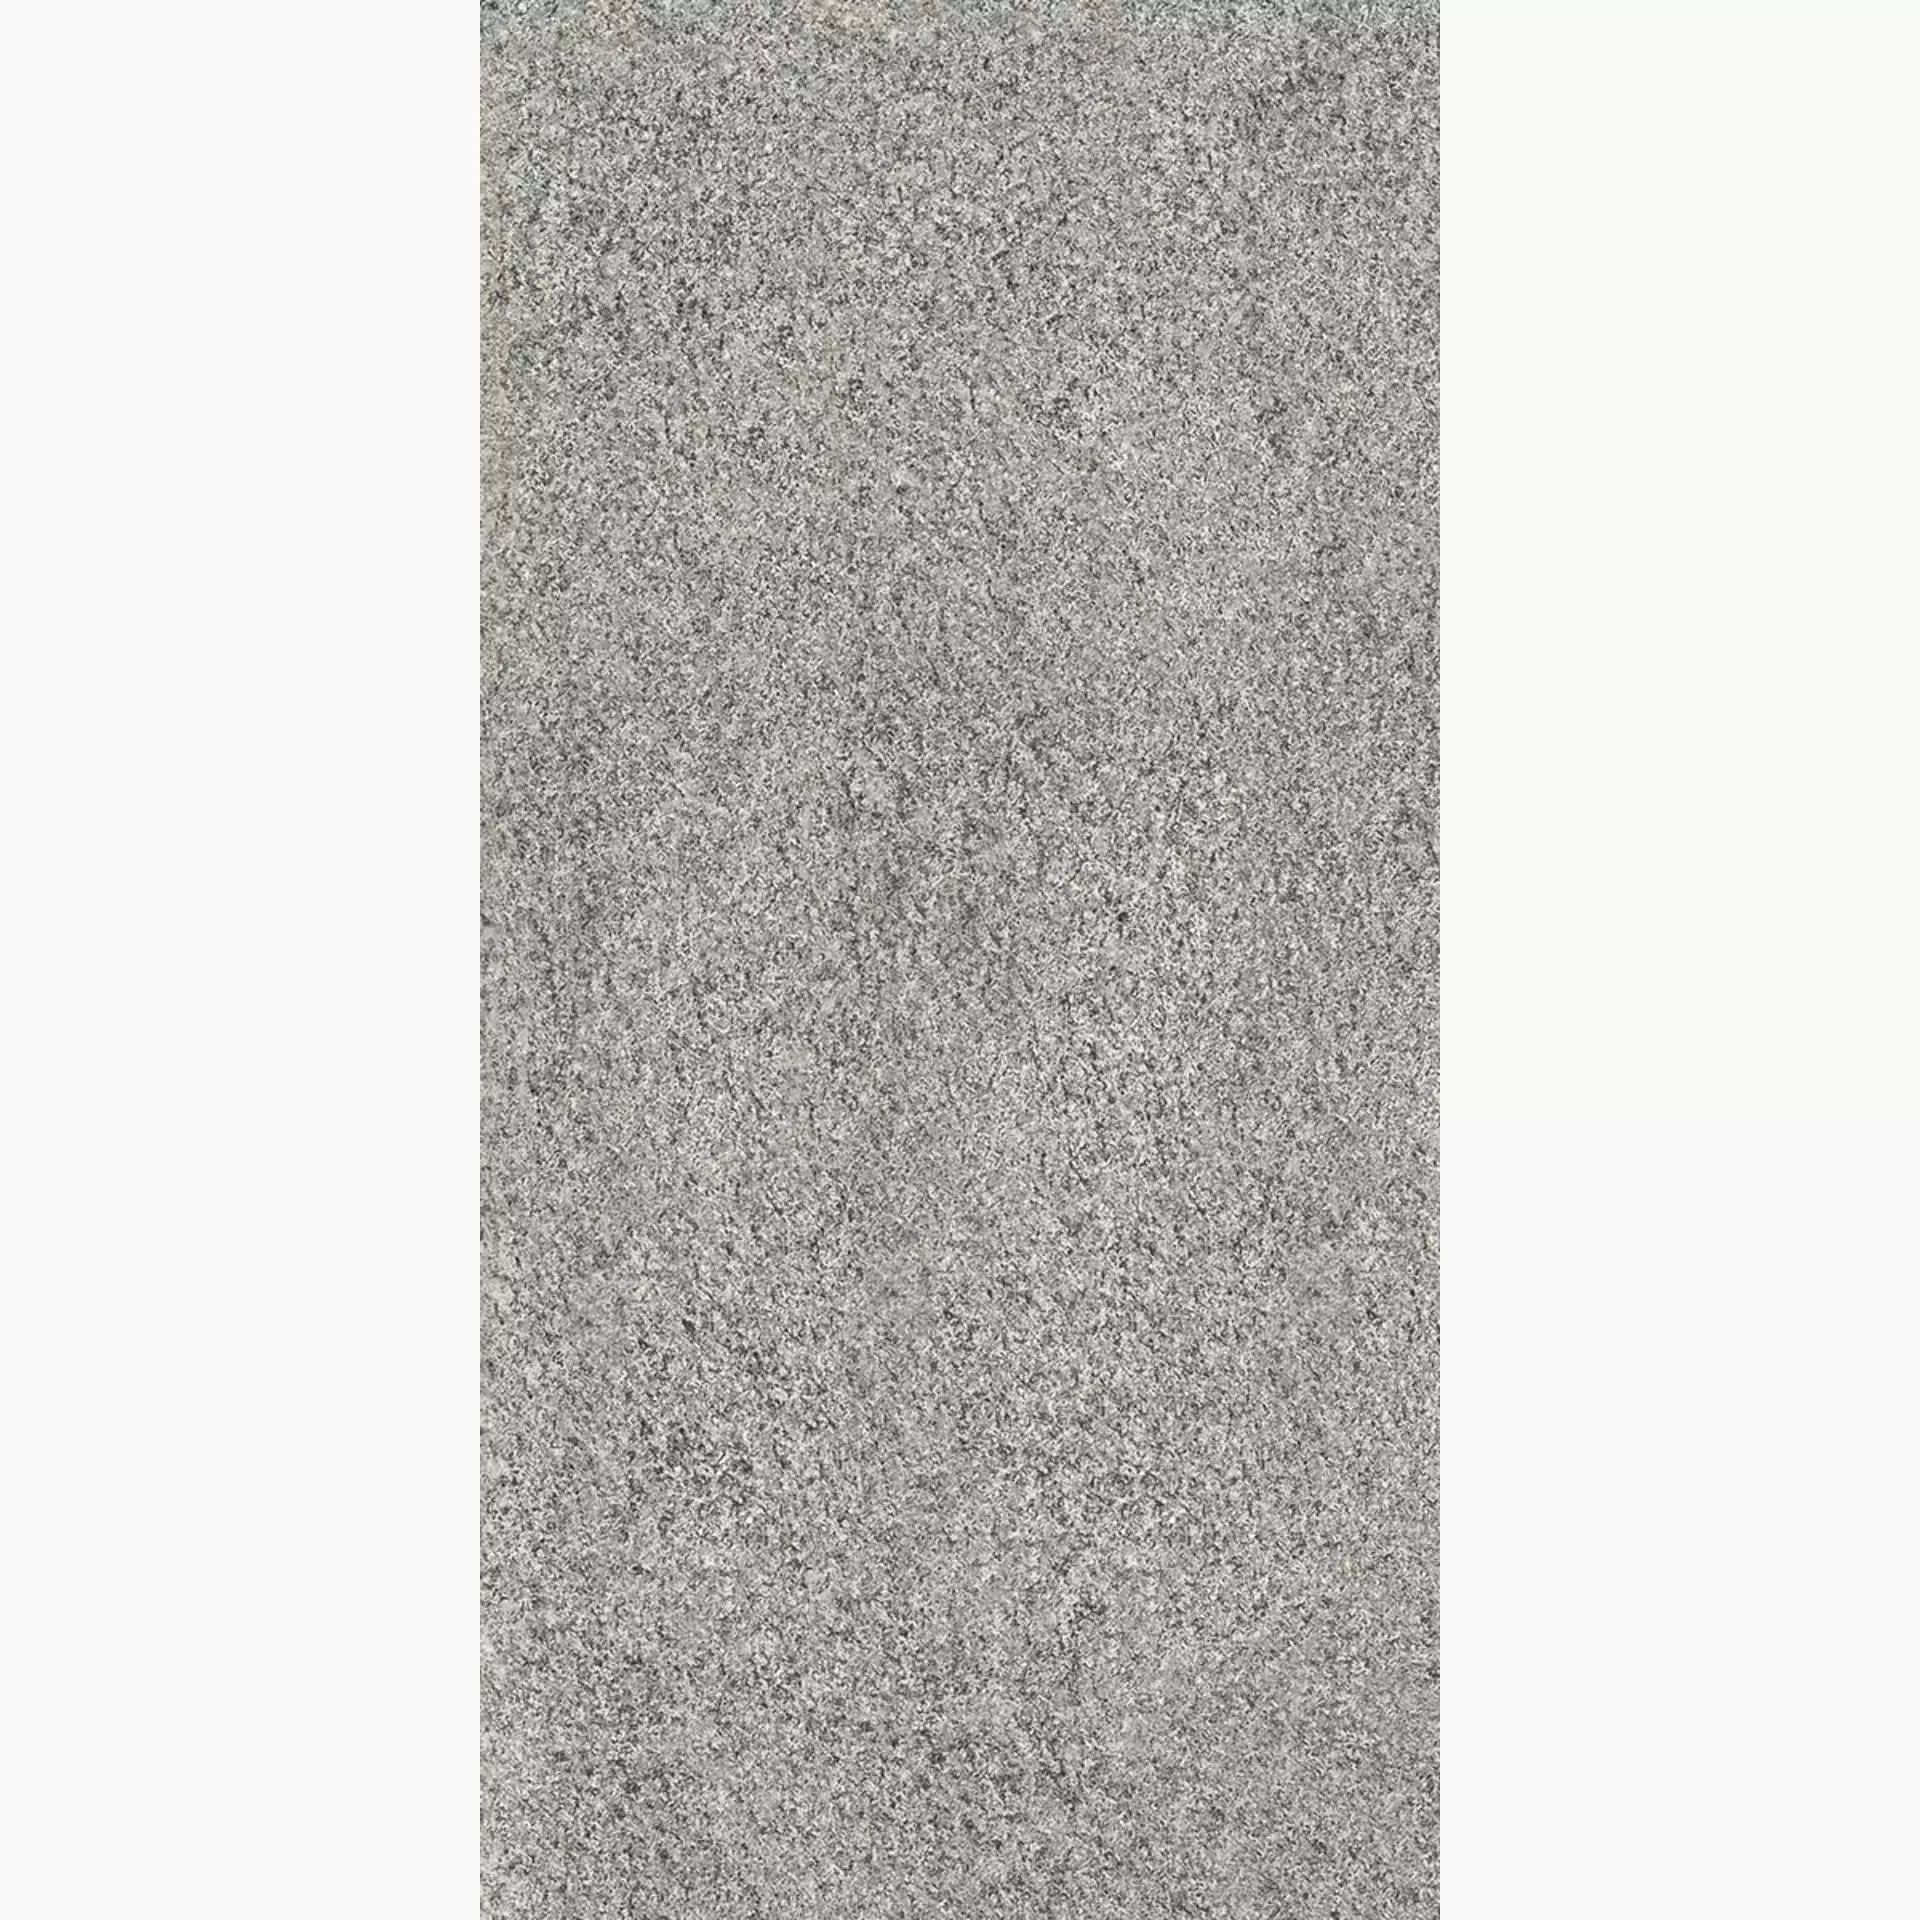 Keope Percorsi Frame Gneiss Grey Spazzolato 474A3249 30x60cm rectified 9mm